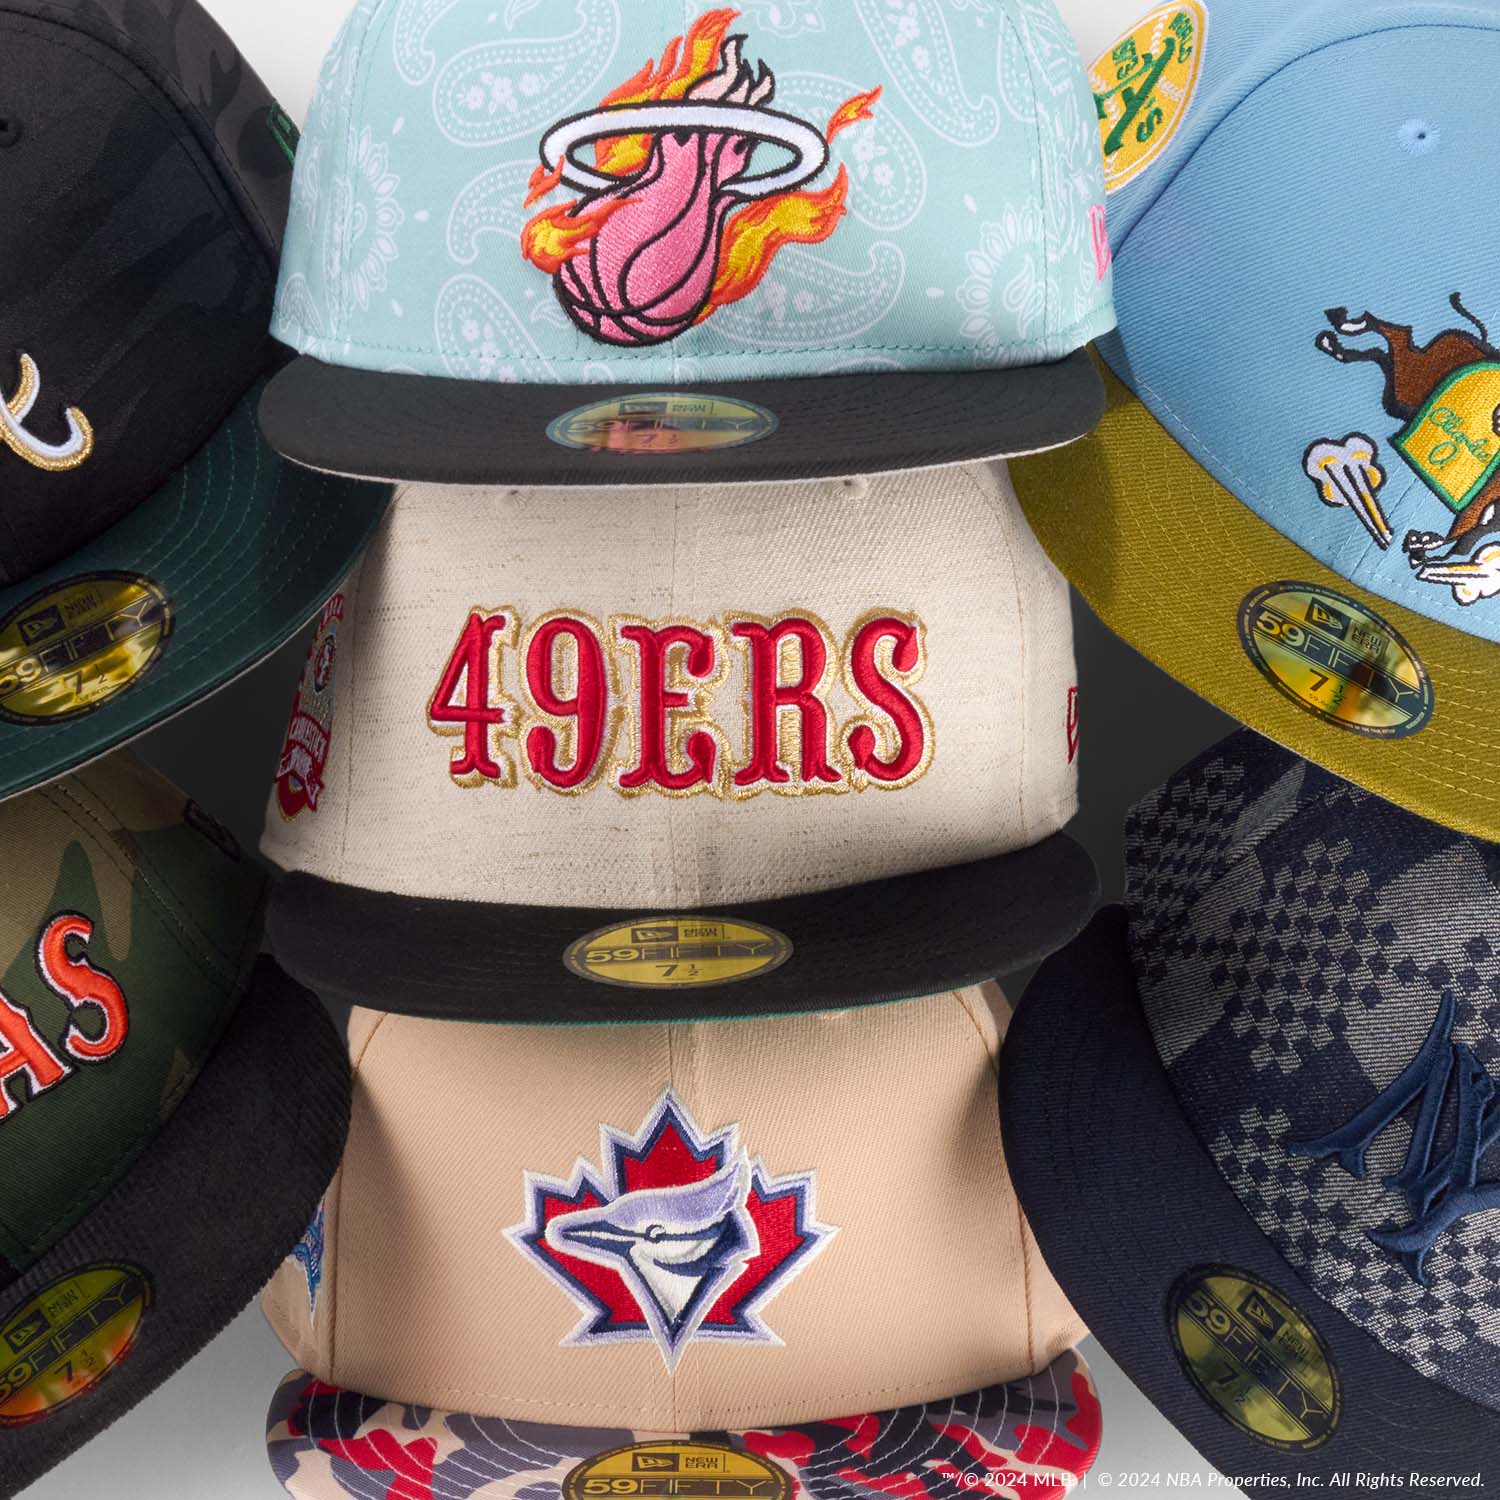 Shop Just Caps Variety Pack in select MLB, NBA, and NFL teams